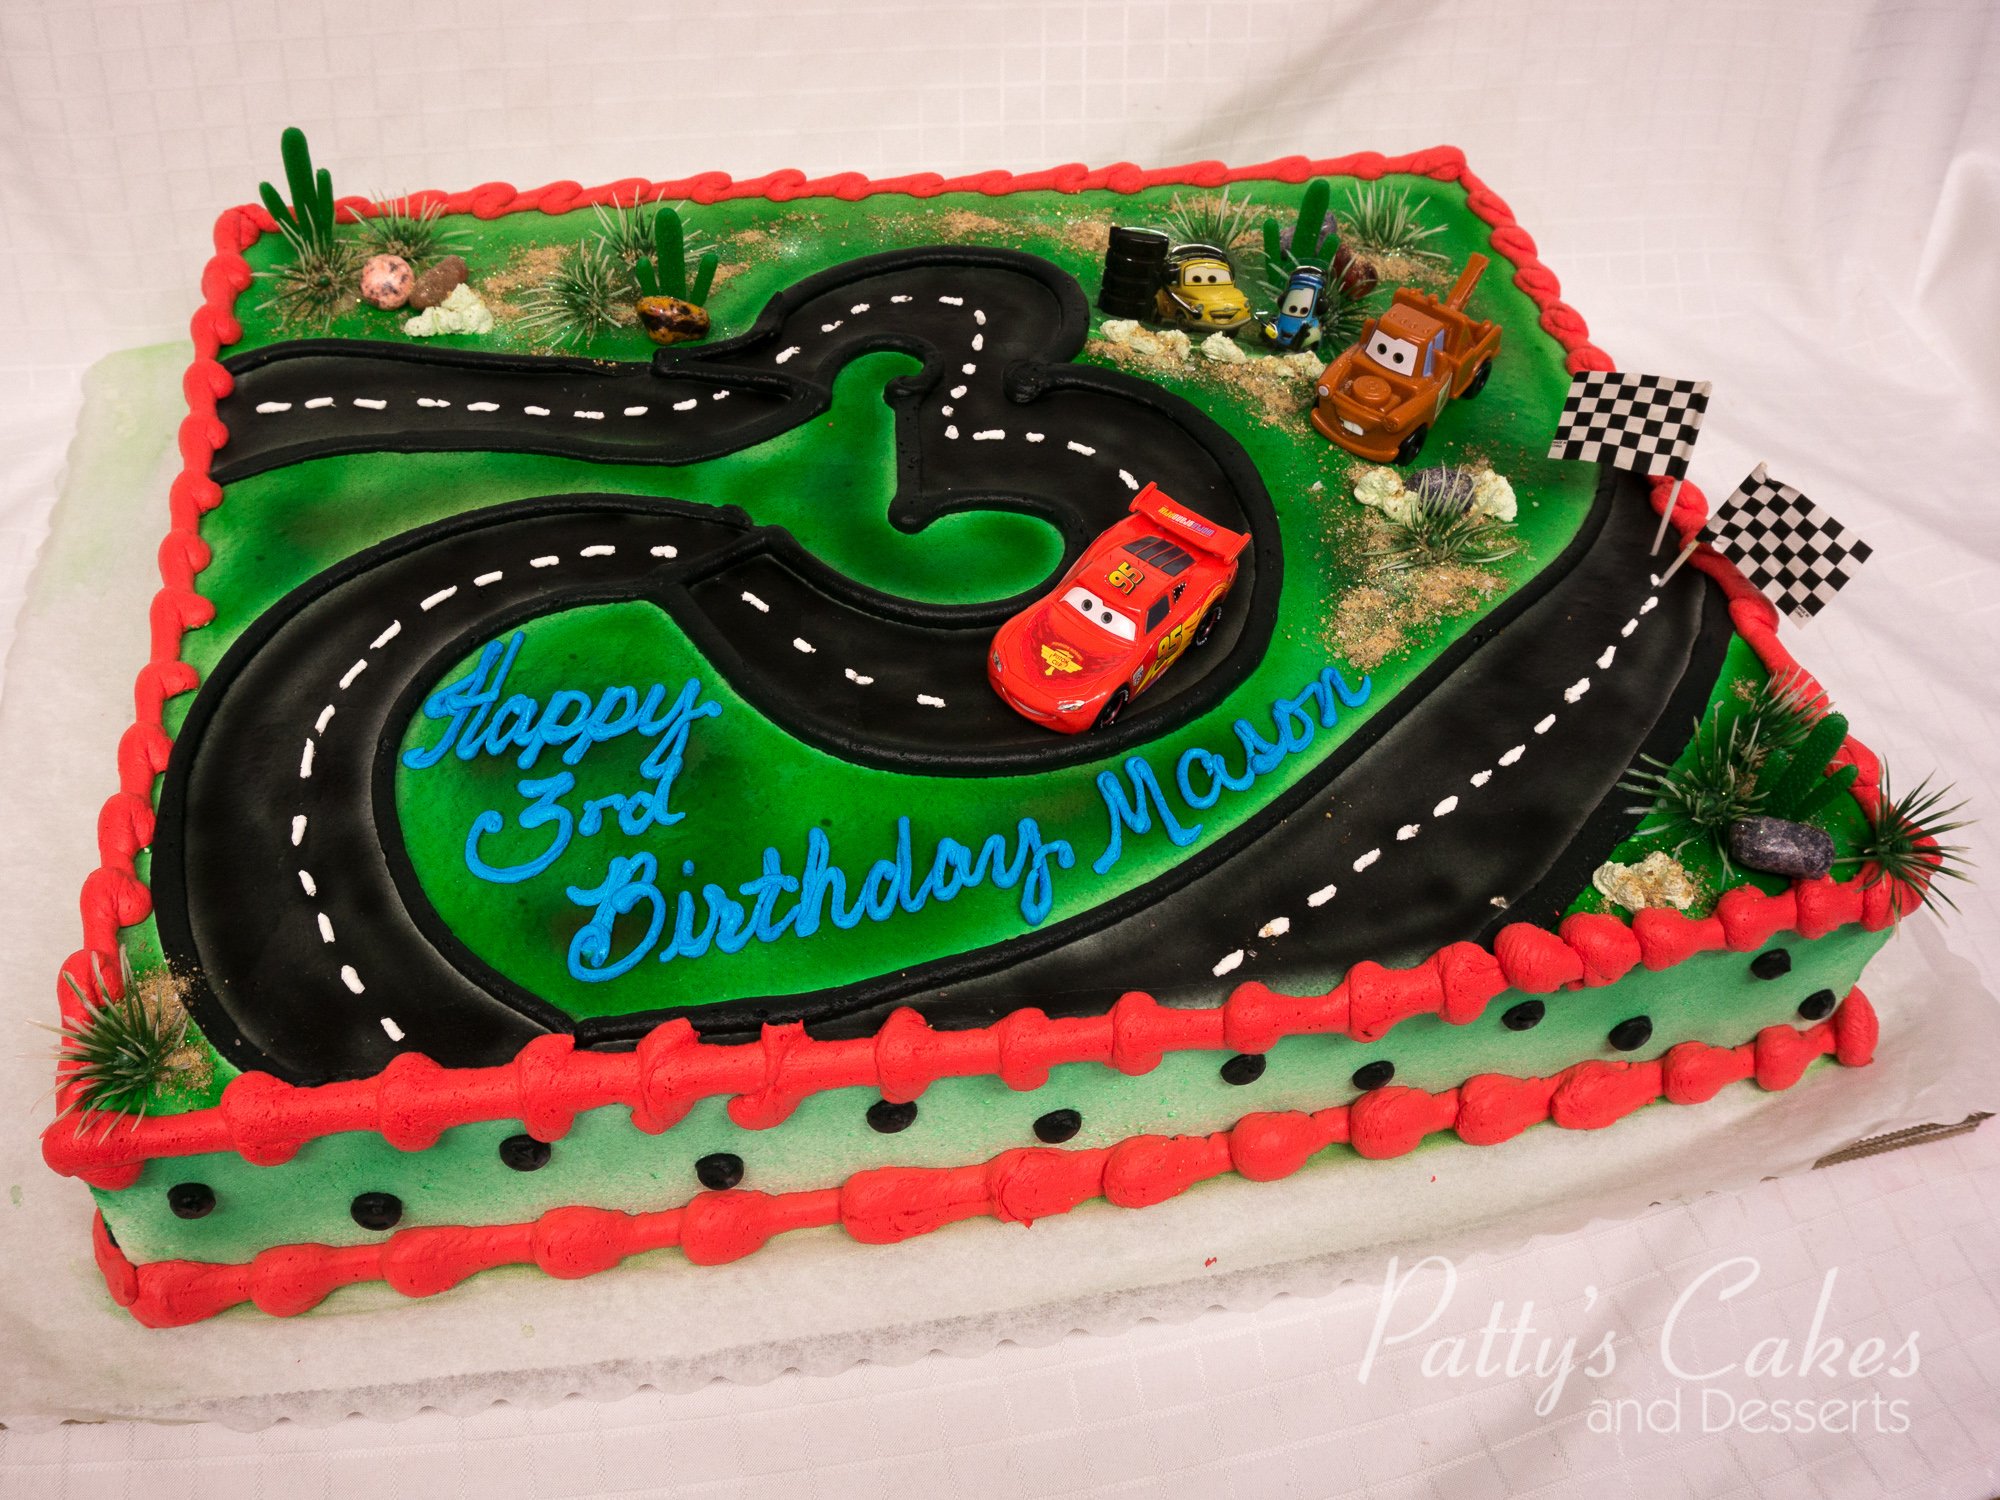 Photo of a disney cars birthday cake - Patty's Cakes and Desserts